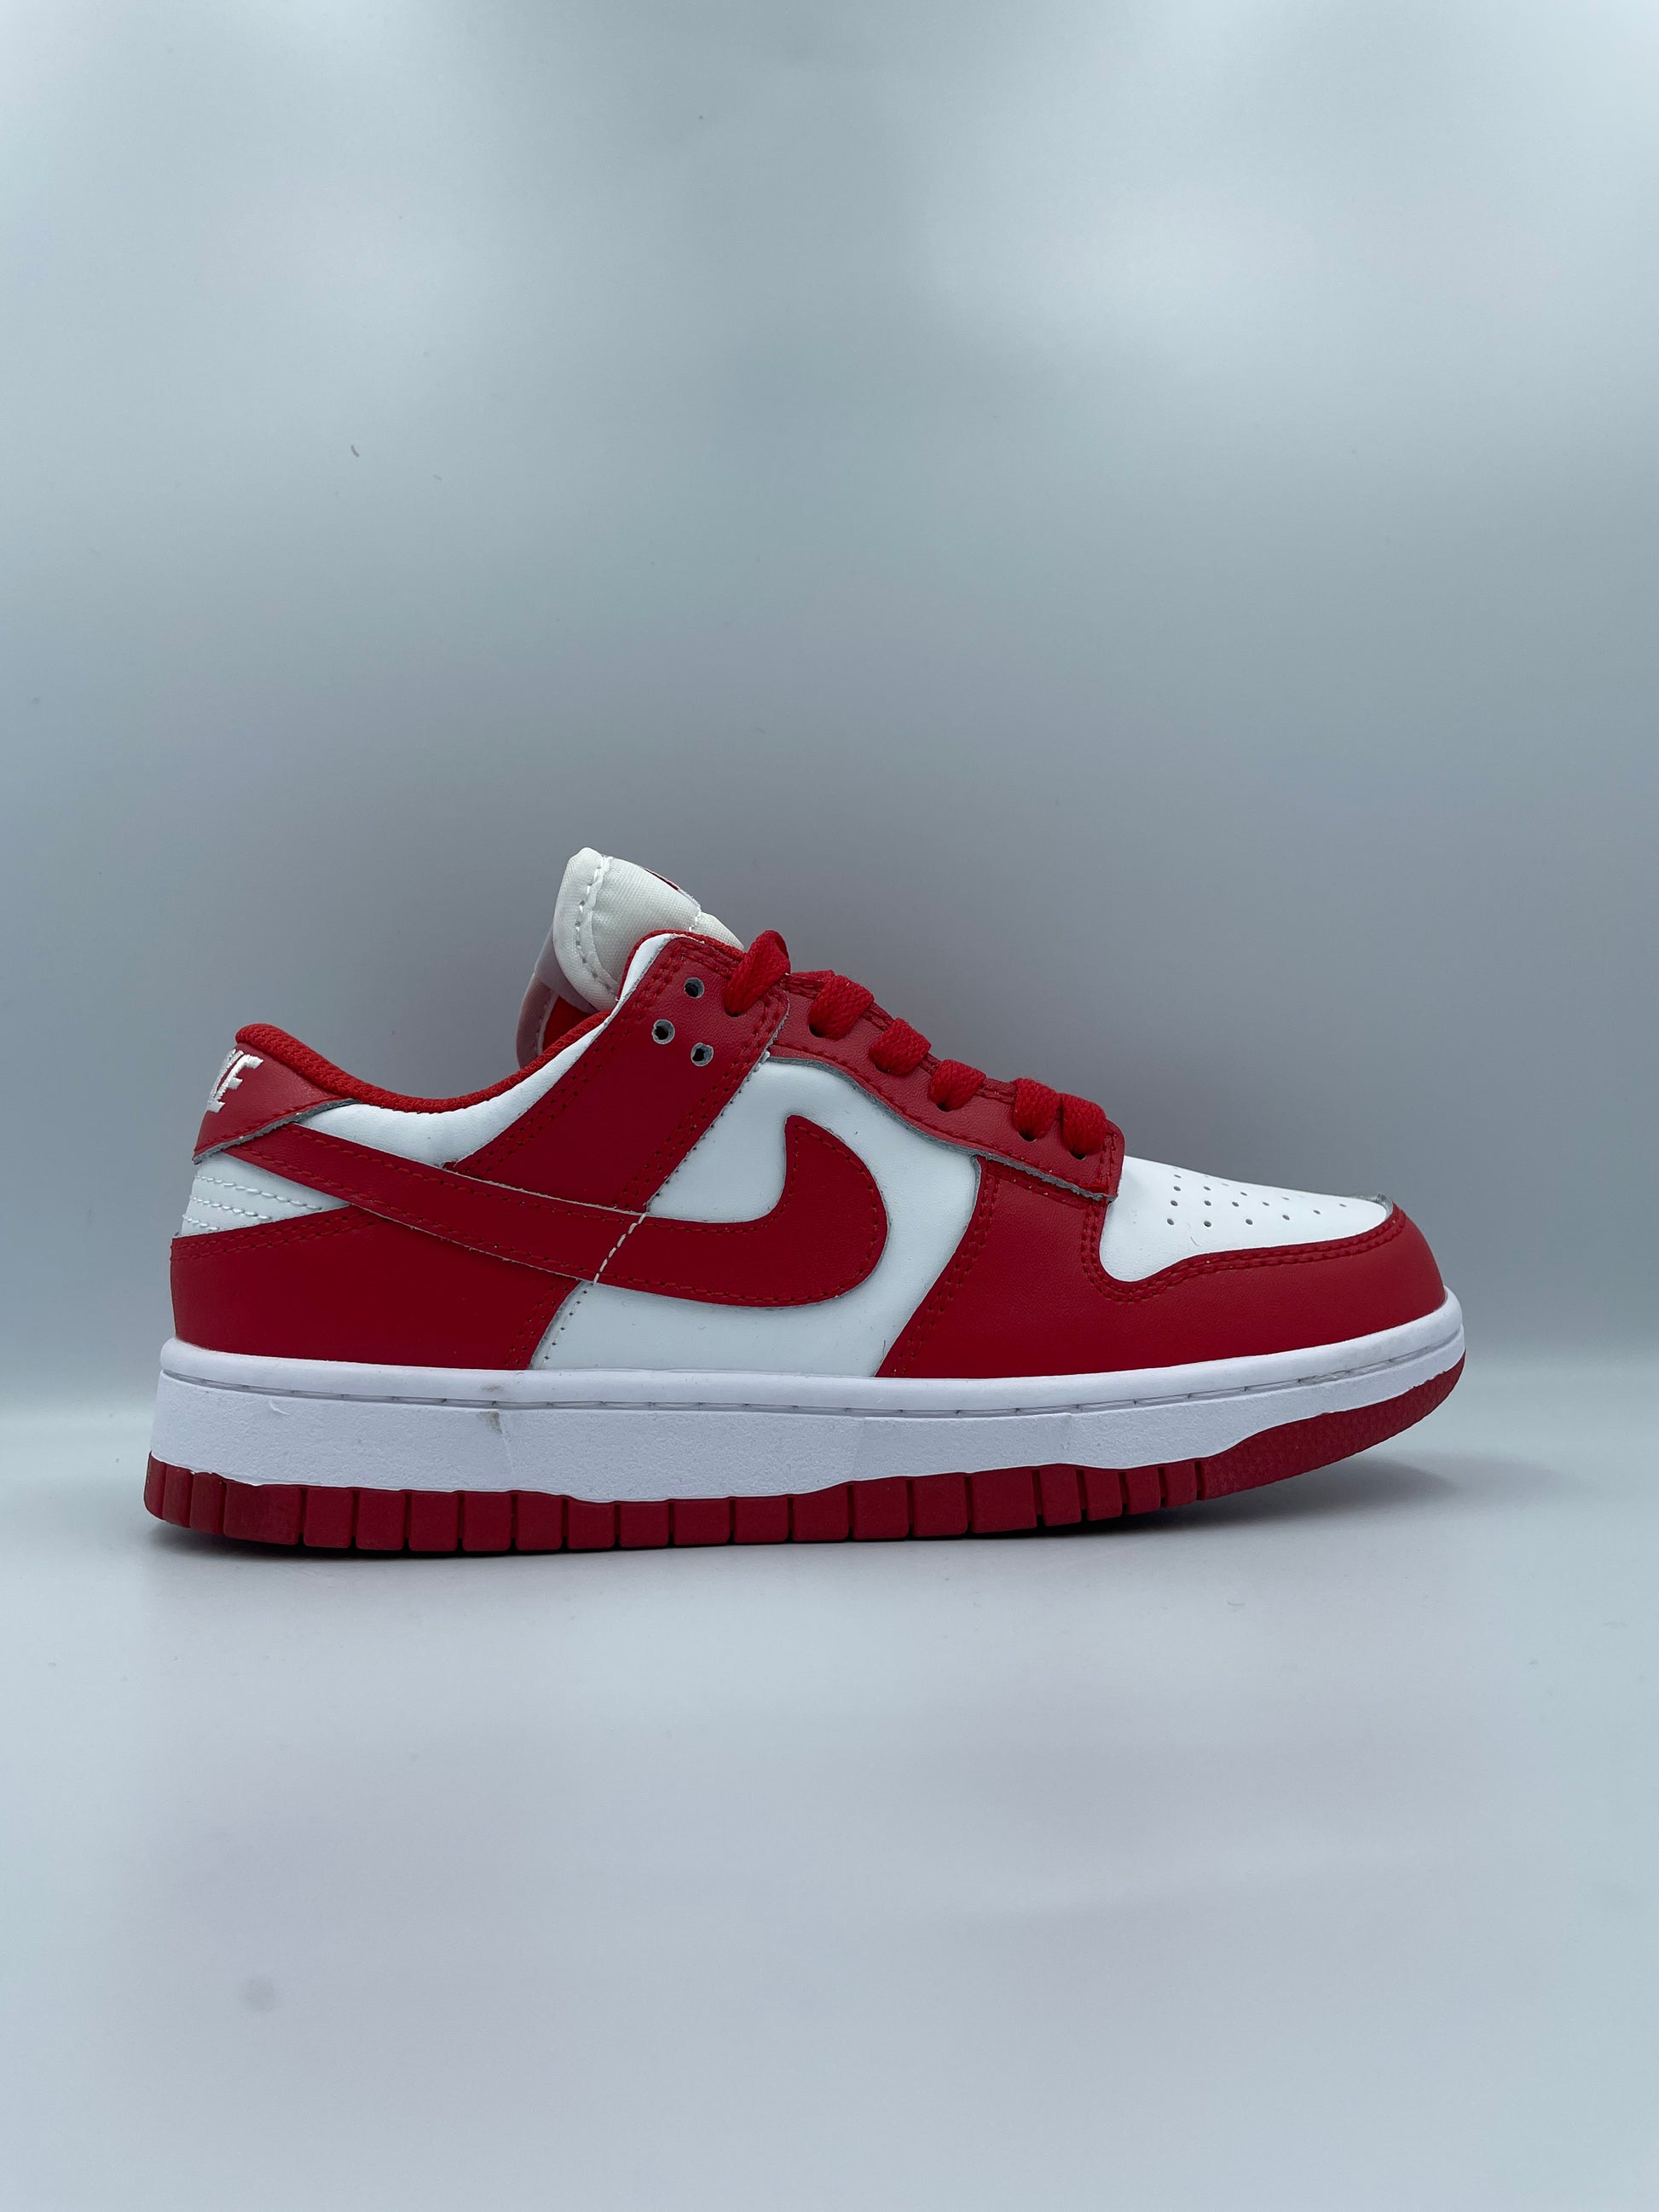 NIKE ダンクLOW レトロ GYM Red